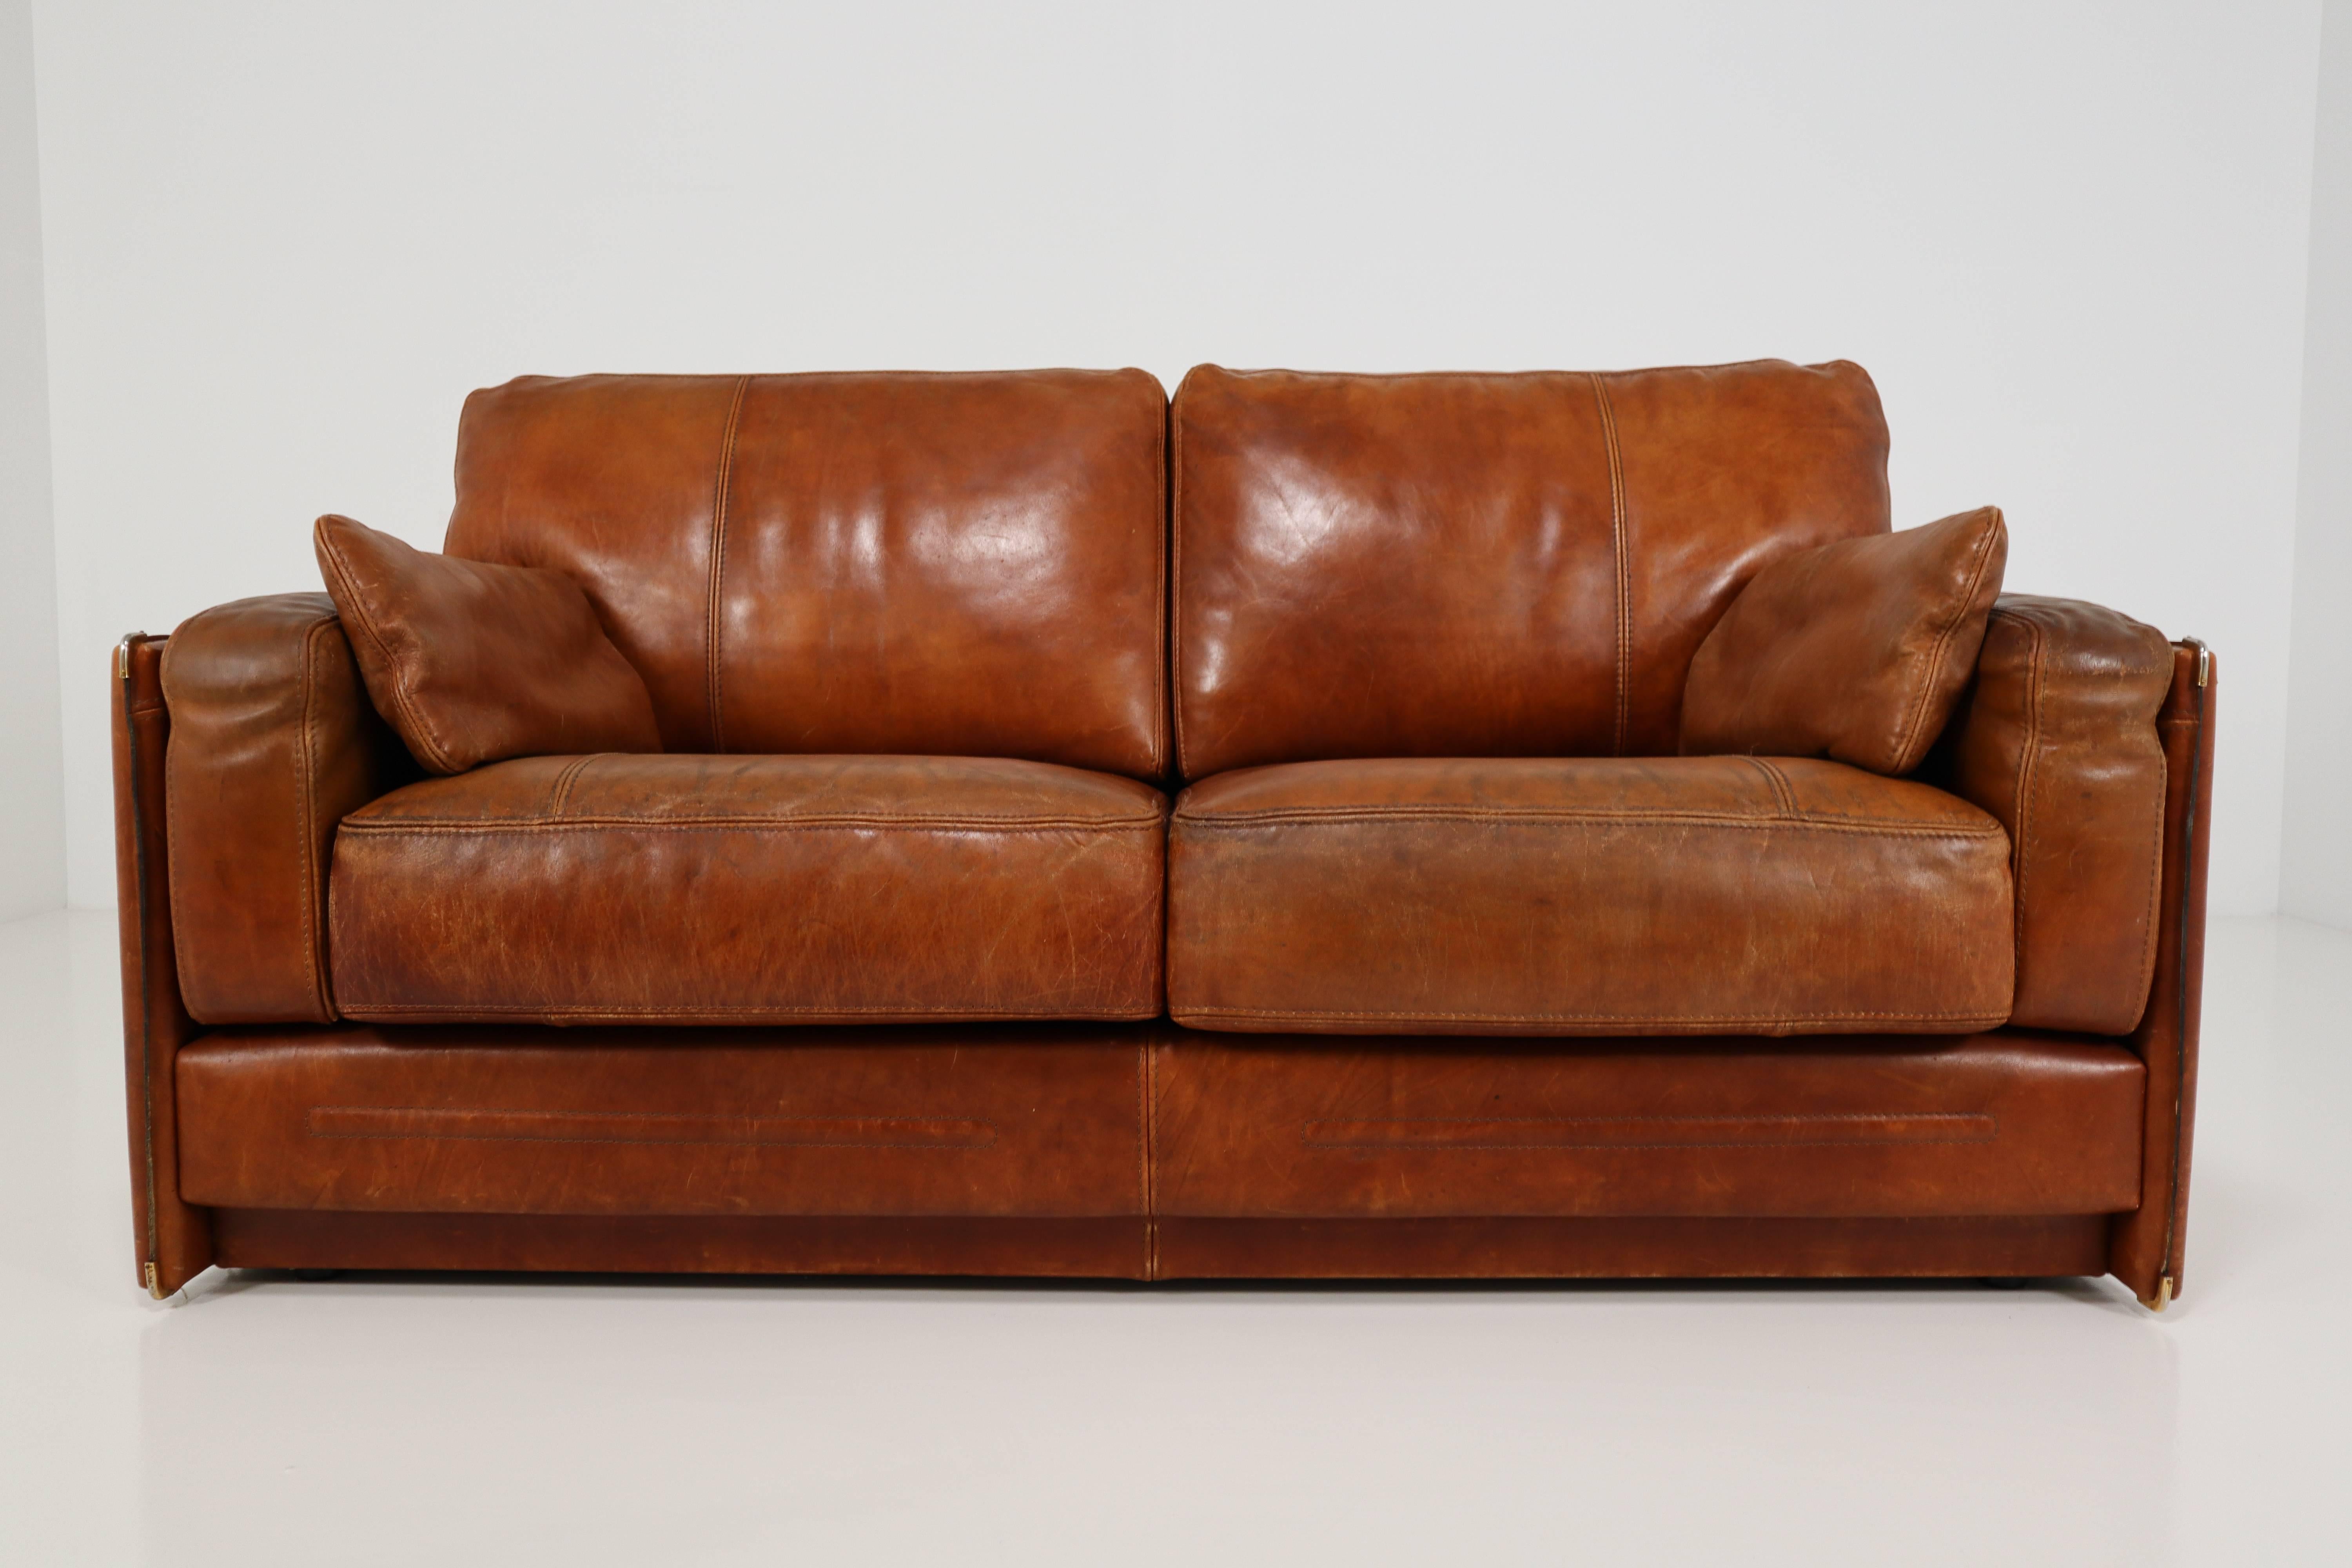 An Italian Baxter bull leather sofa from high quality. The sofa contains an solid wood frame and an distressed thick buffalo hide. We also loved the cognac color of the leather which will work in many surroundings. The condition has tears an